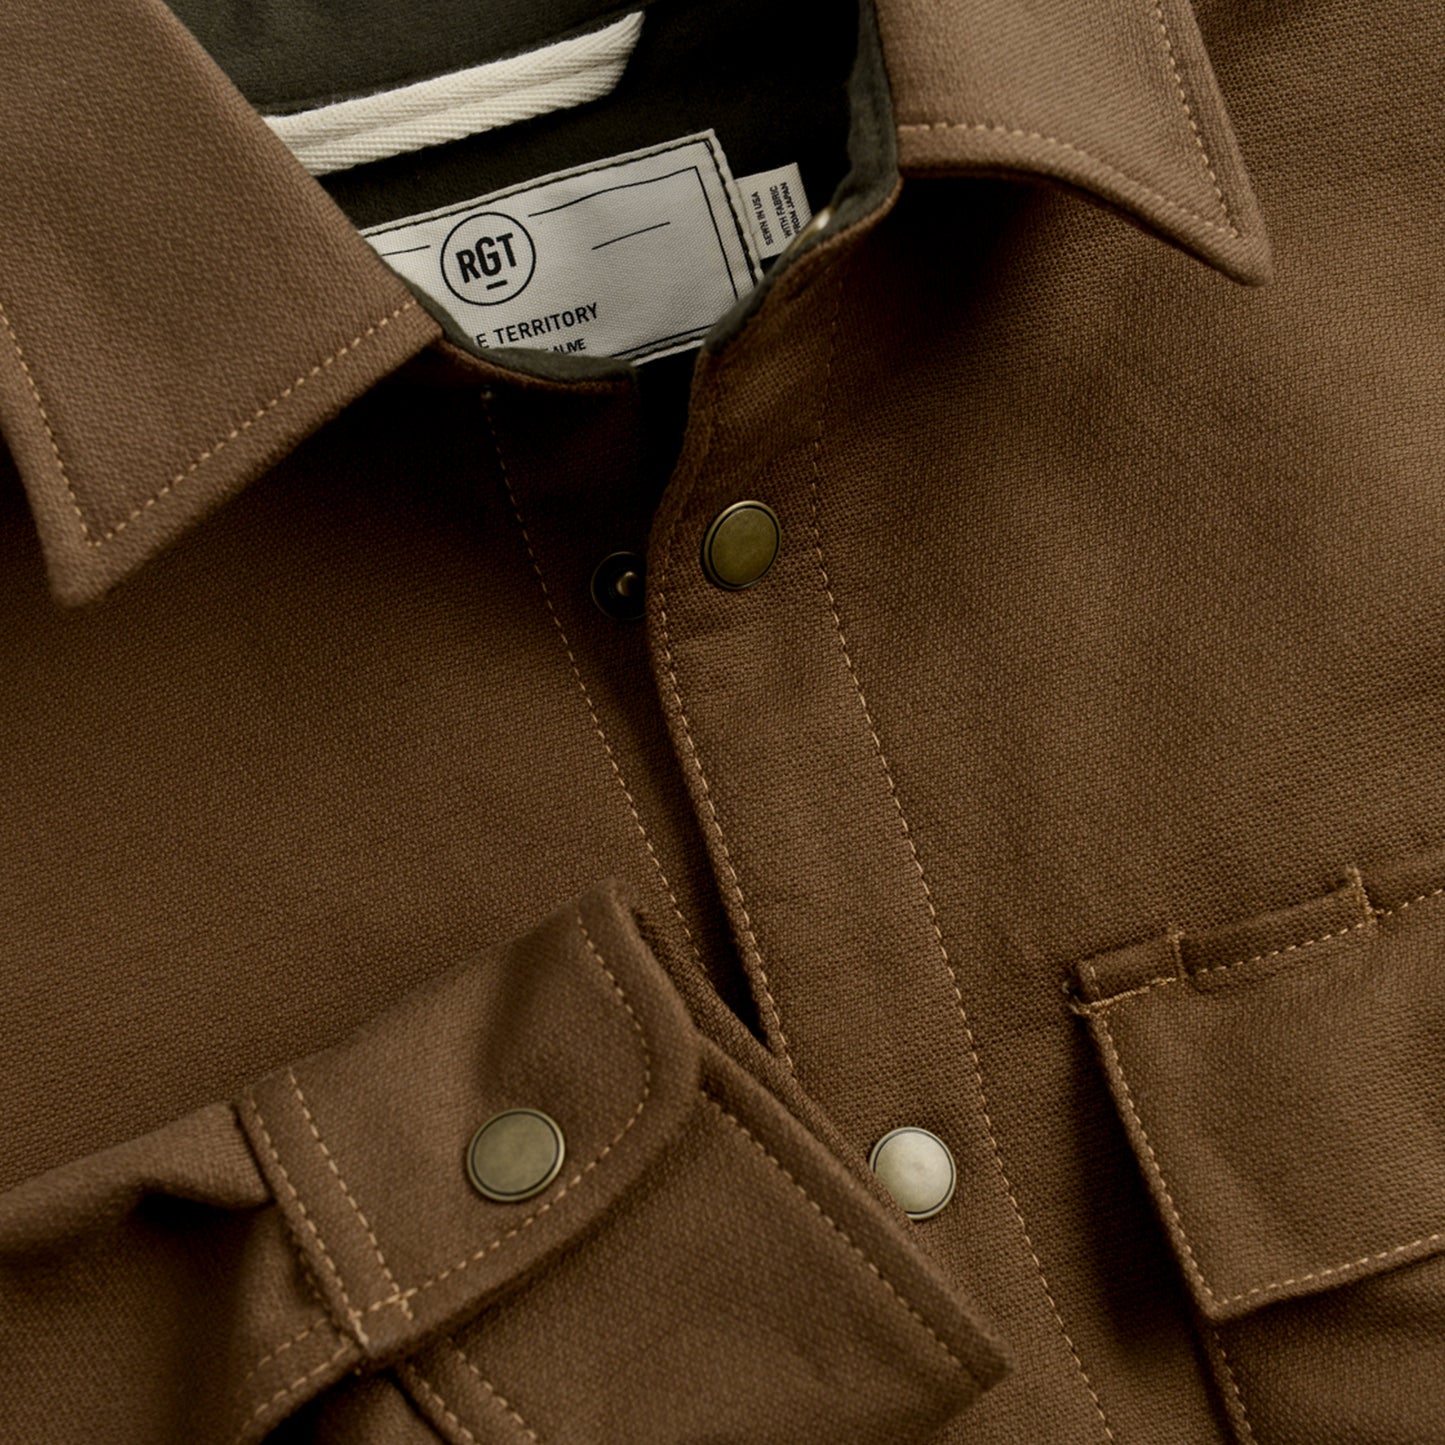 Rogue Territory Brushed Oxford Overshirt